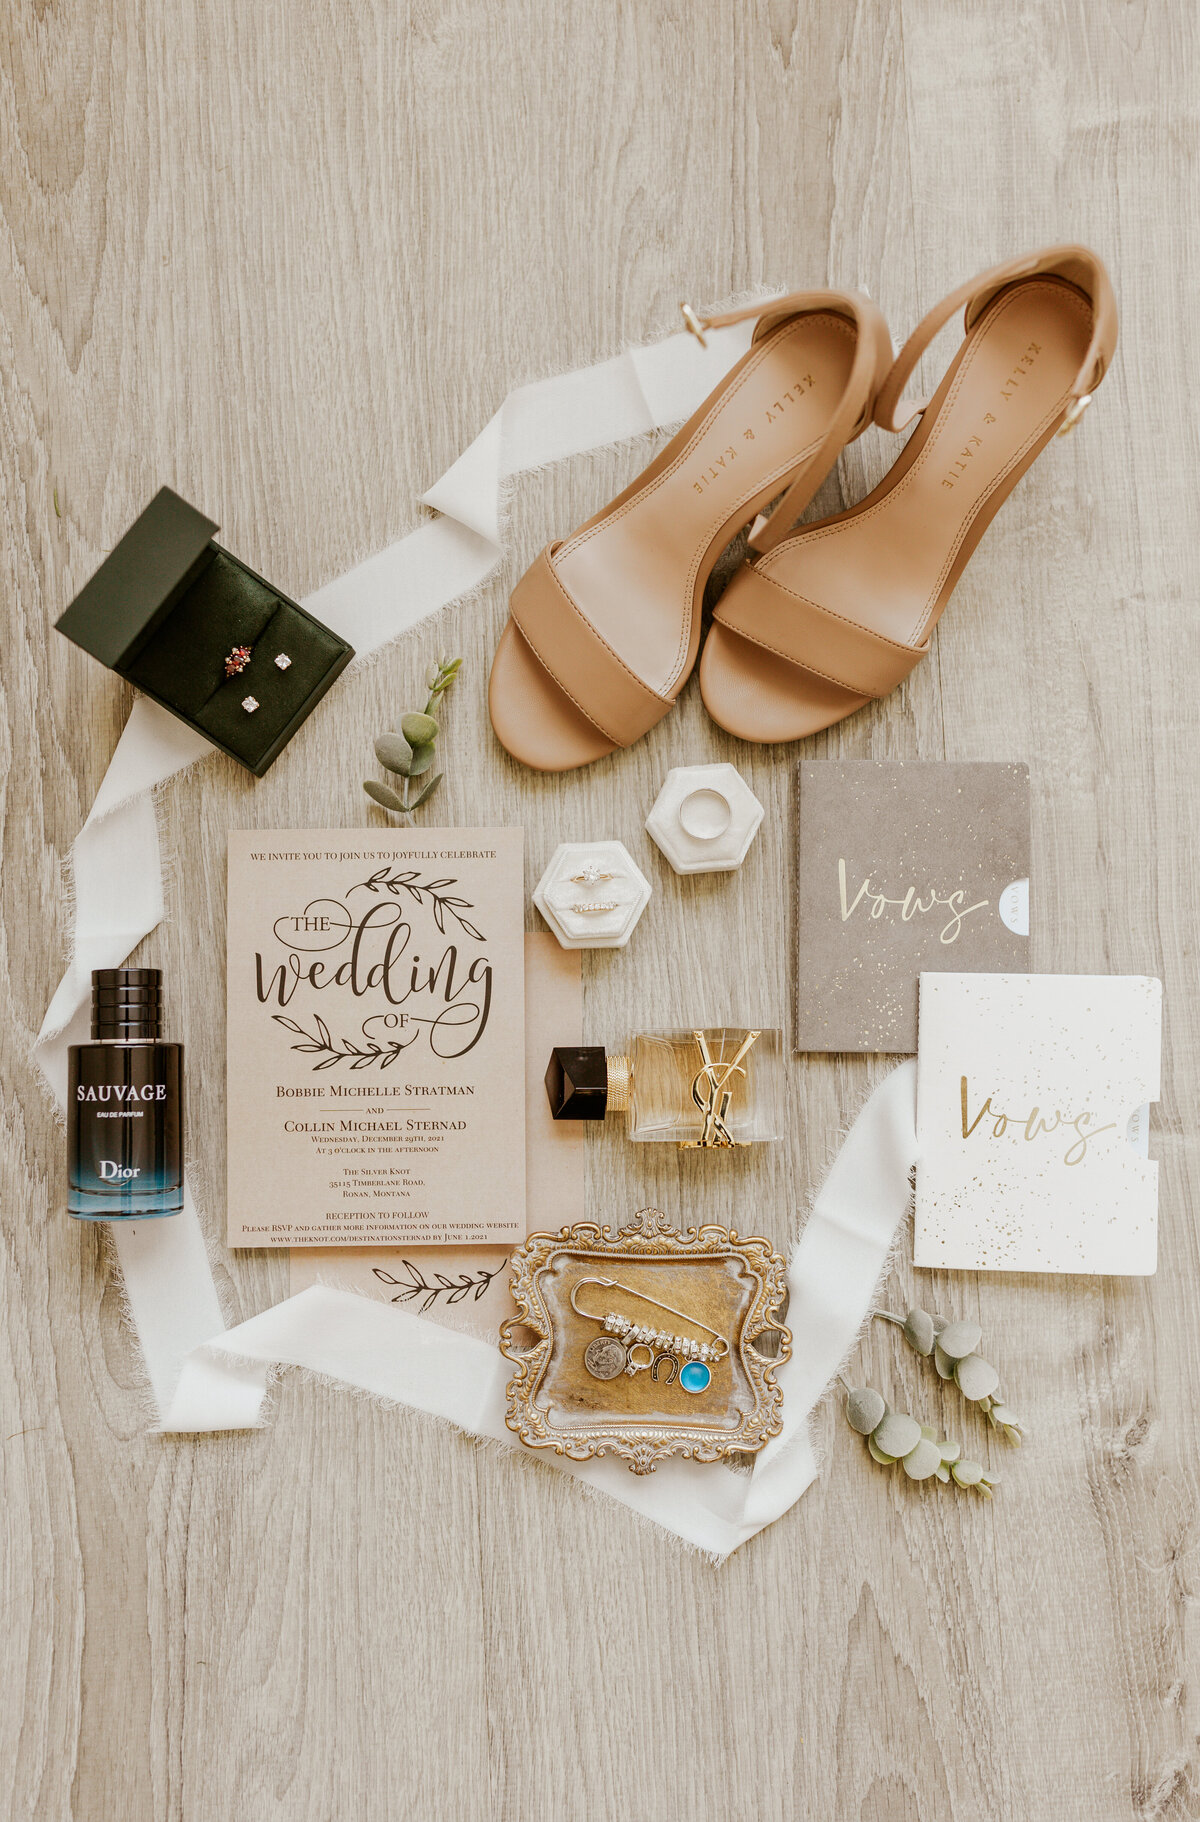 wedding invitation, rings, and shoes